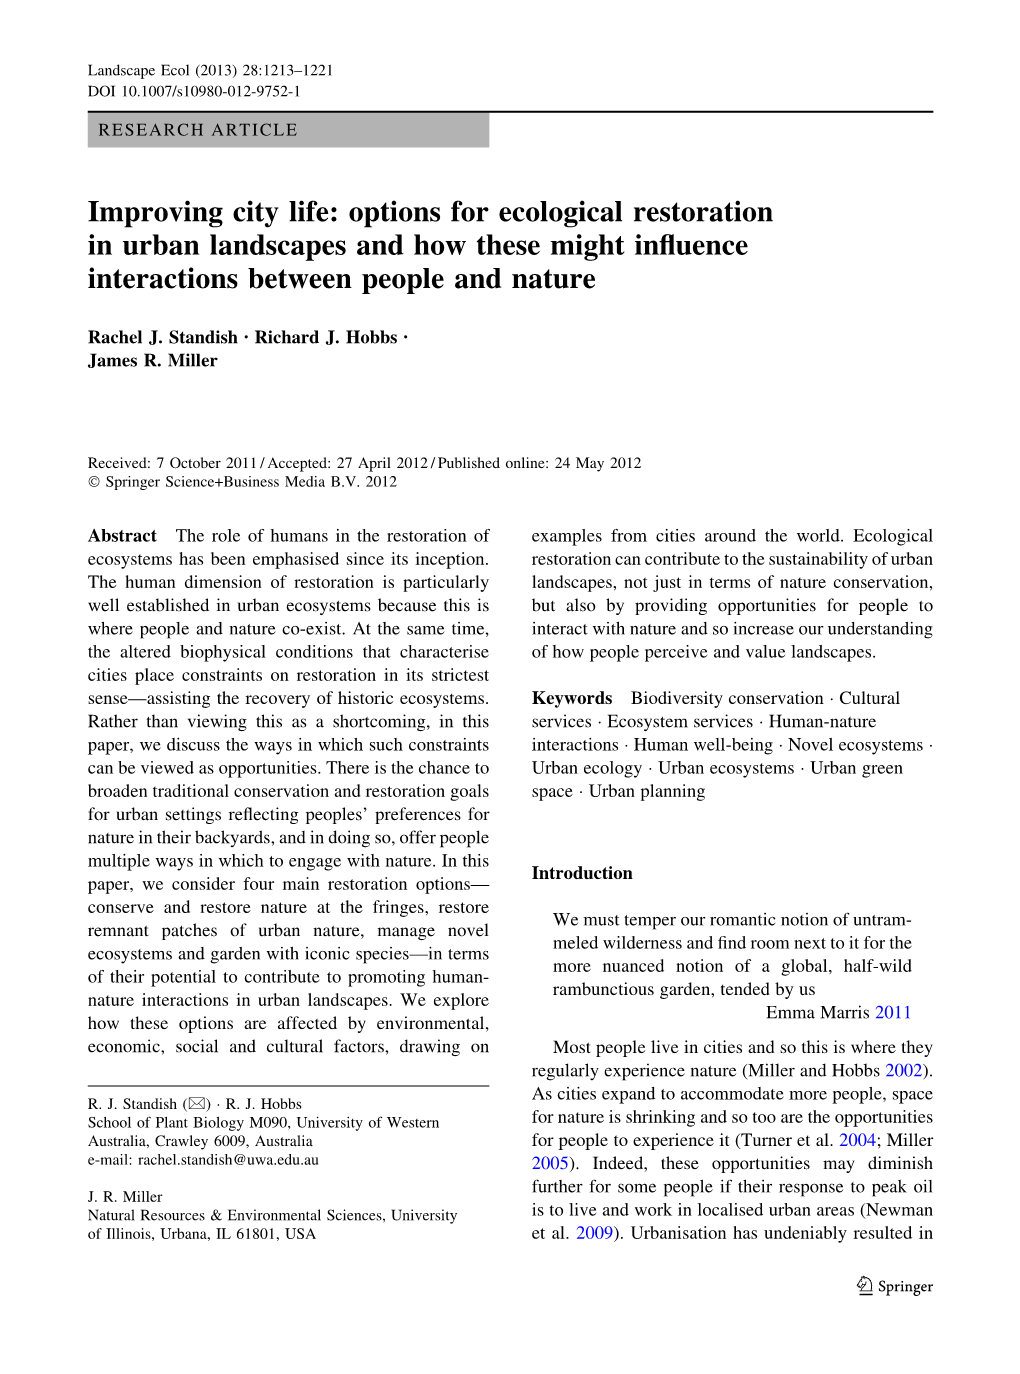 Improving City Life: Options for Ecological Restoration in Urban Landscapes and How These Might Inﬂuence Interactions Between People and Nature